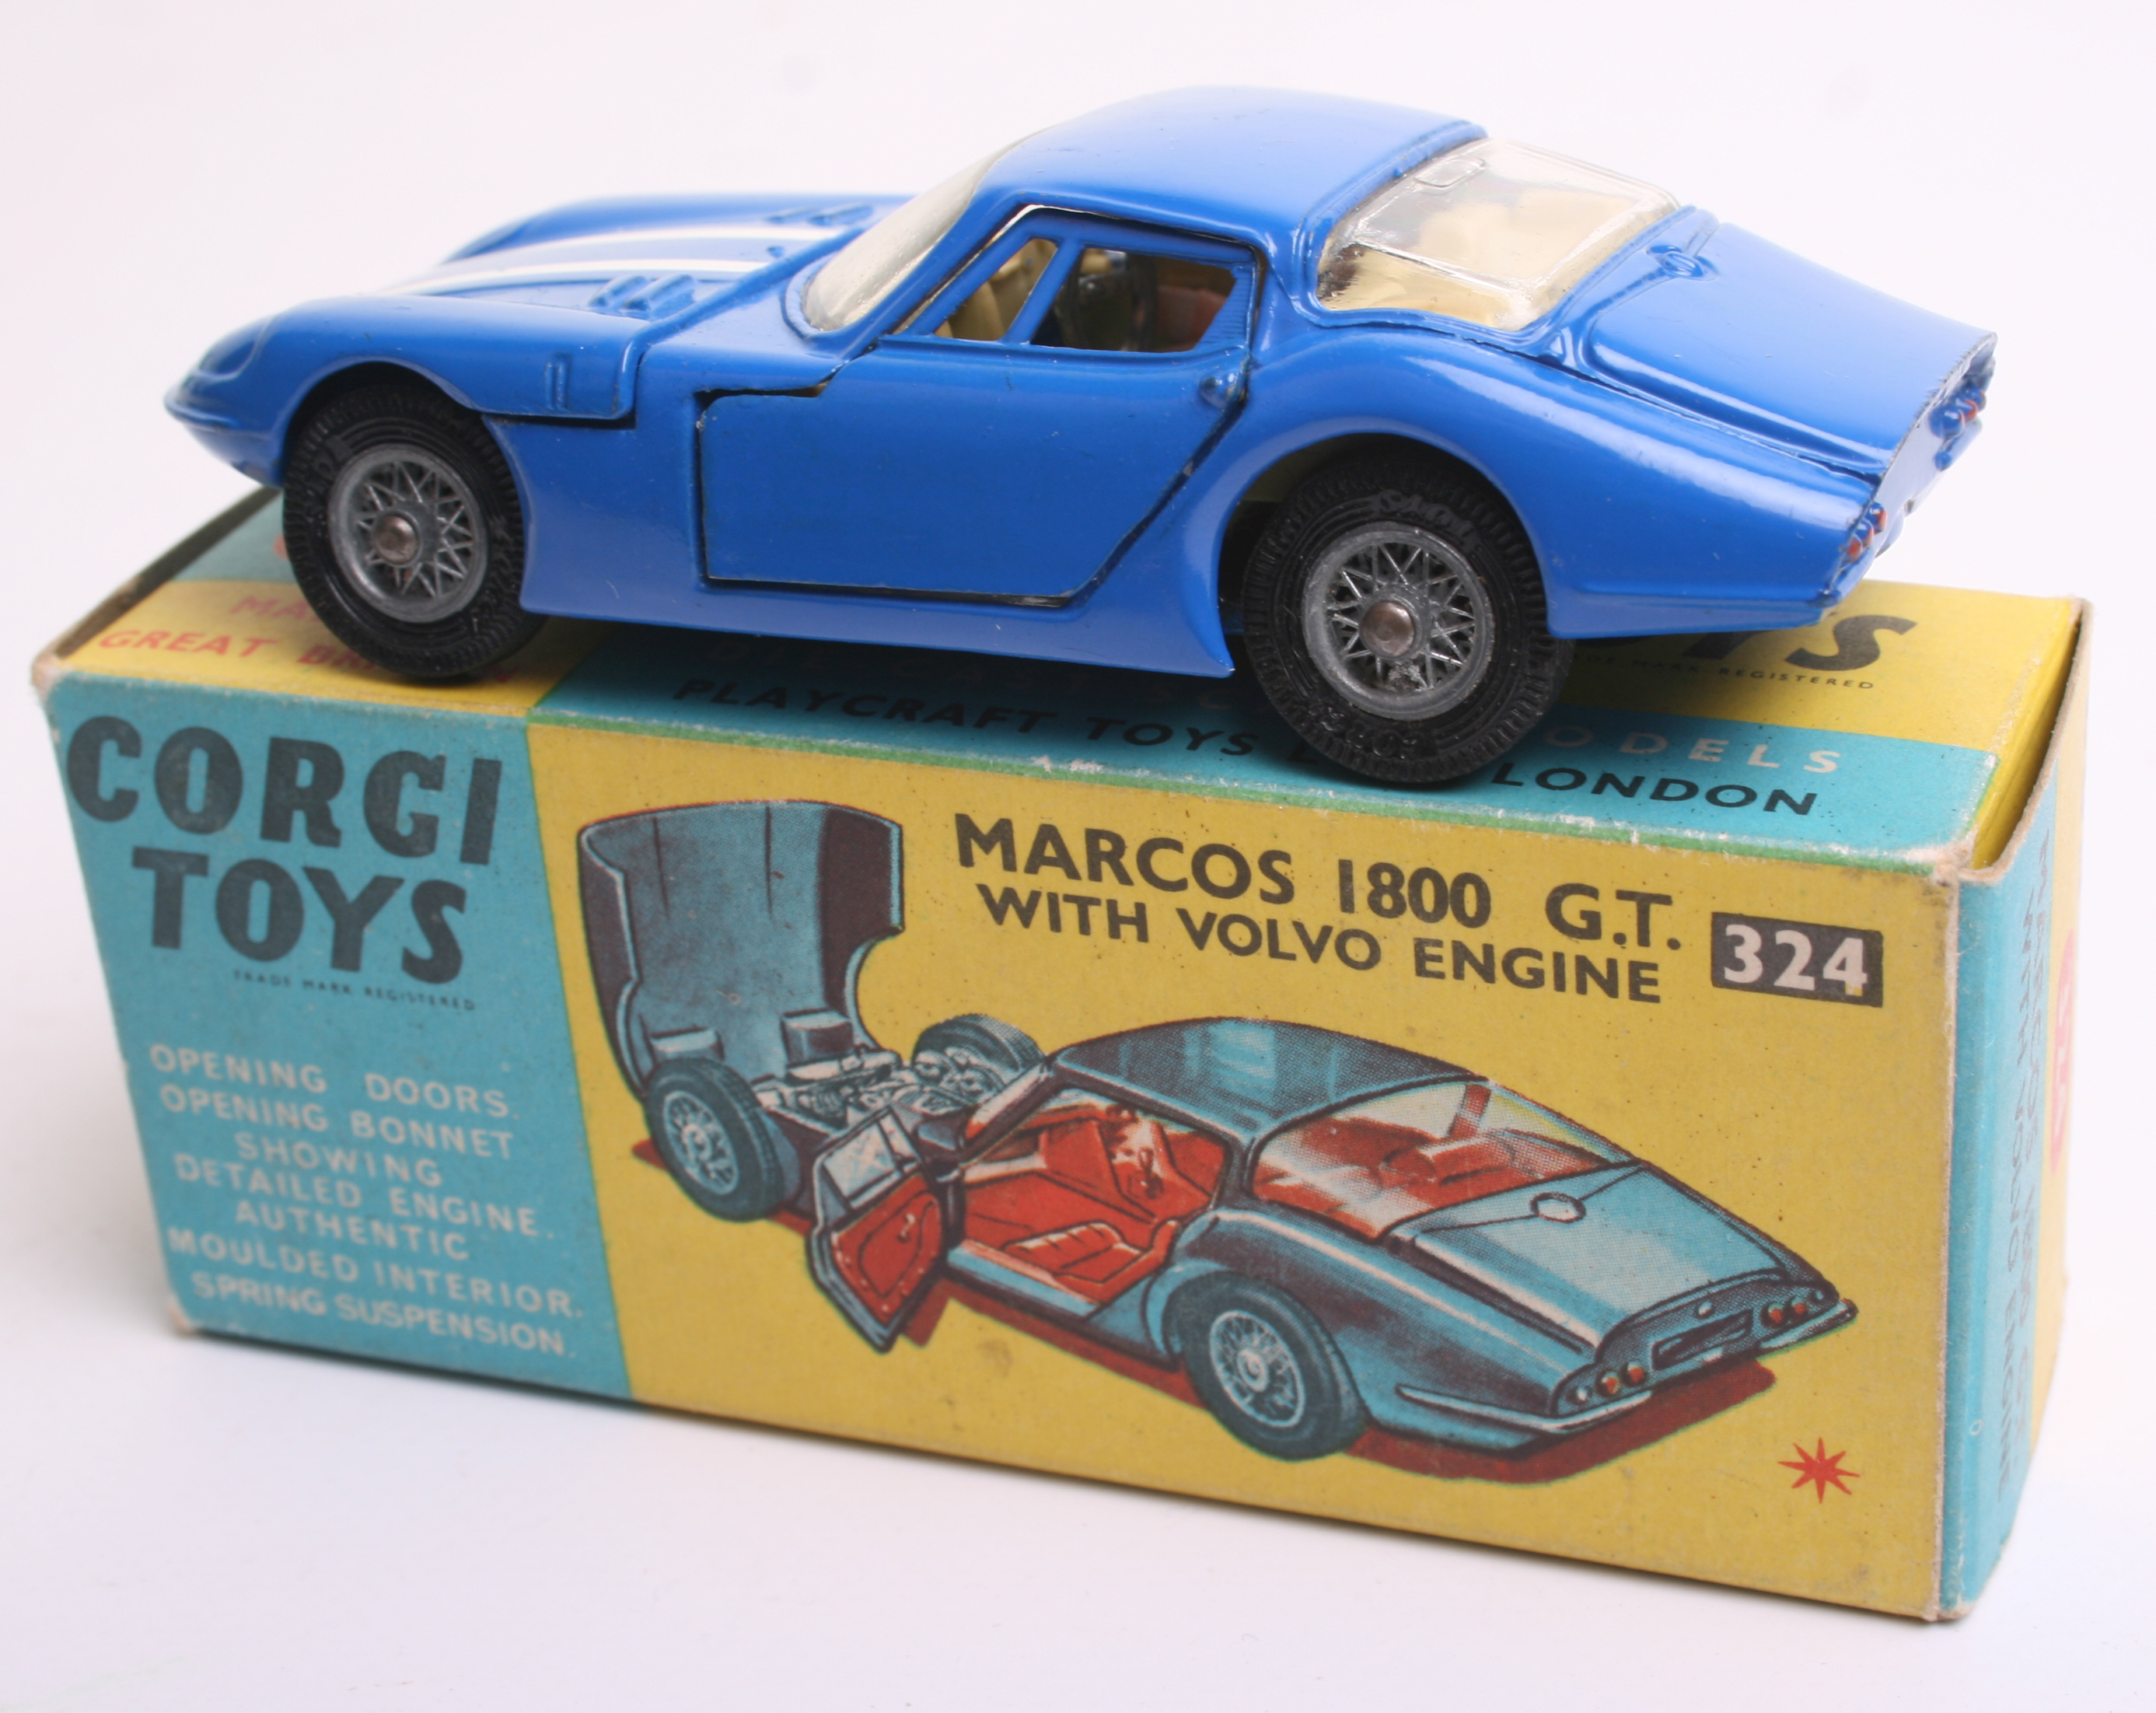 Corgi Toys 324 Marcos 1800 GT with Volvo Engine, blue body, pale blue/white interior, wire wheels, - Image 2 of 2